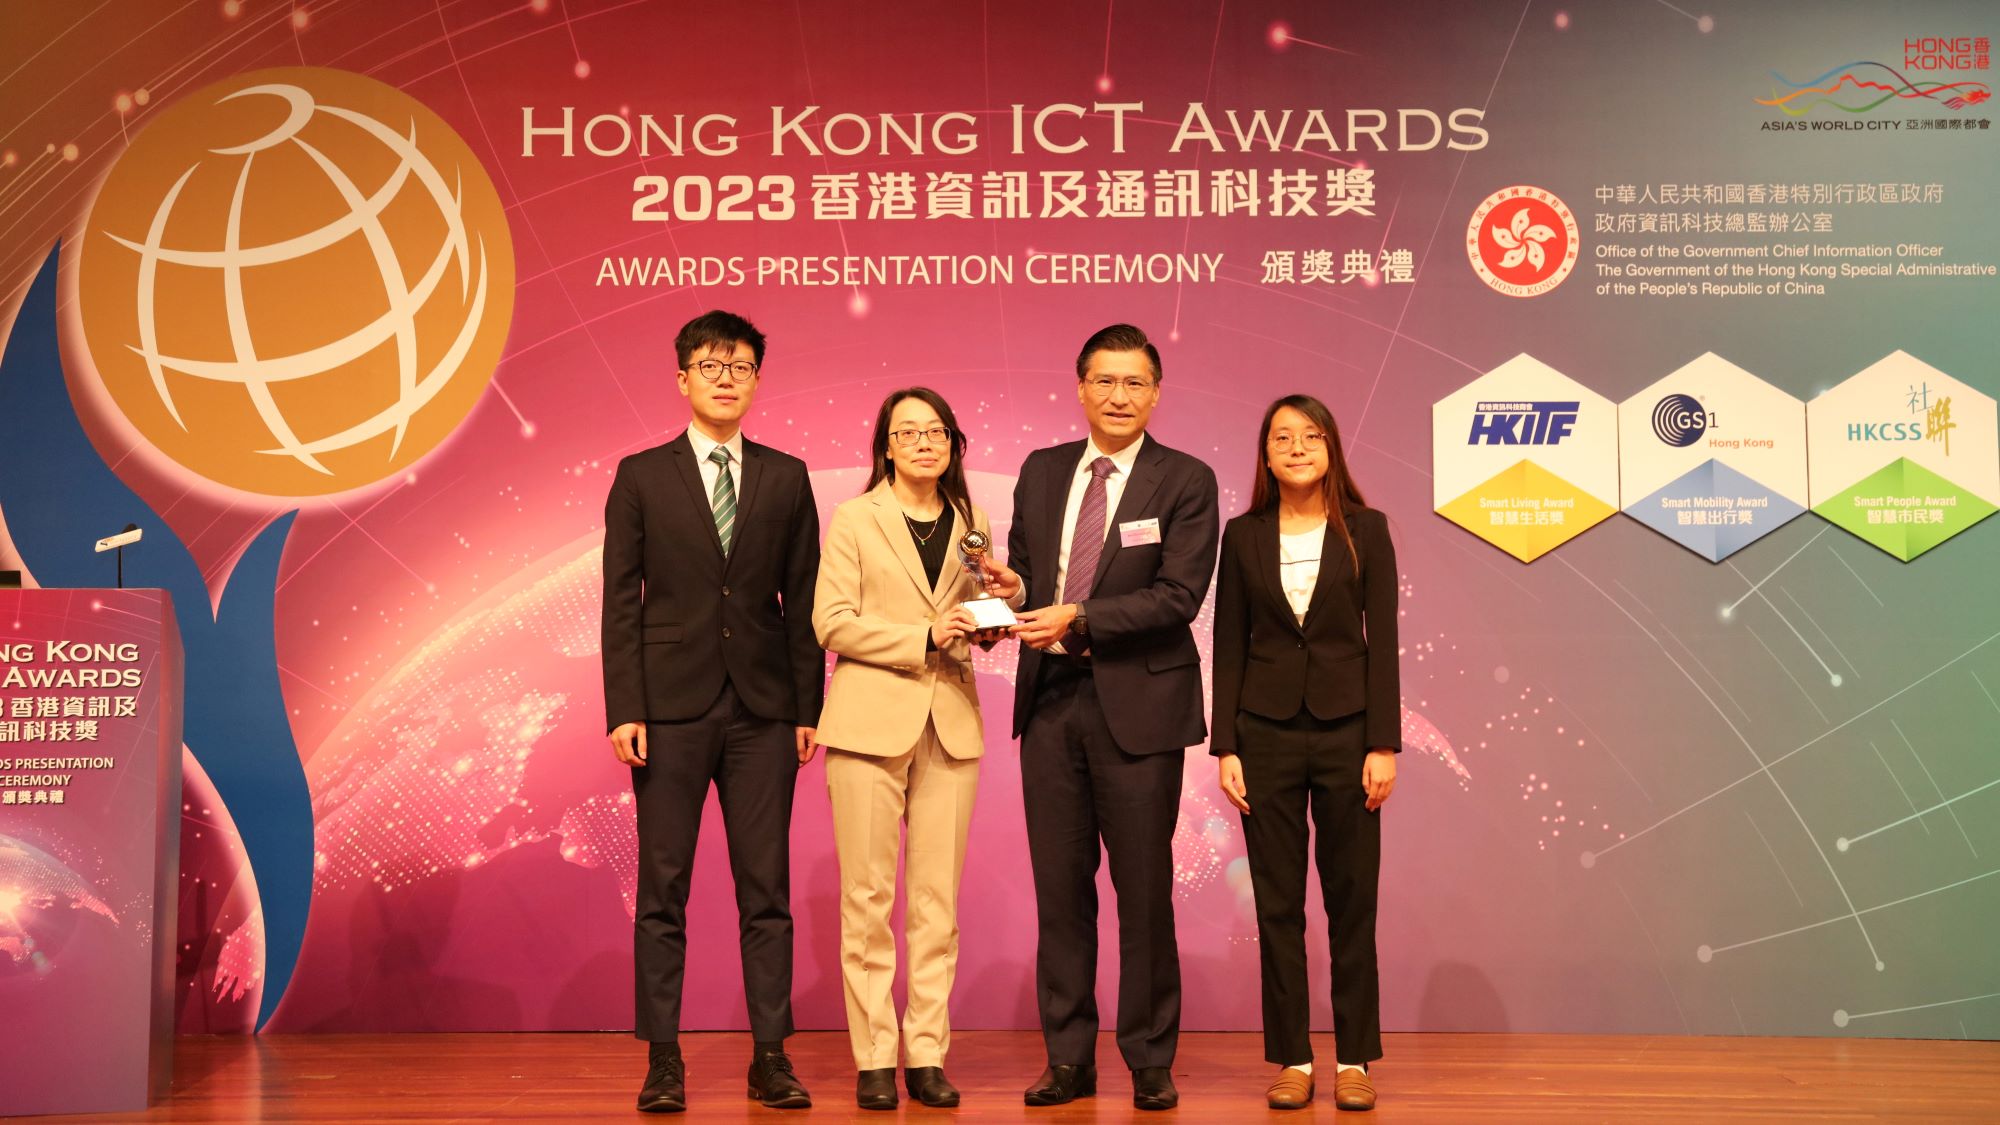 Ms Tse Shuk-mei, Stand-in Assistant Director of the Hong Kong Observatory (second from left), Mr Fan Man-hei, Scientific Officer (first from left), and Ms Li Hiu-yan, Experimental Officer (first from right), receiving the Bronze Award of the Smart Mobility (Smart Transport) Category